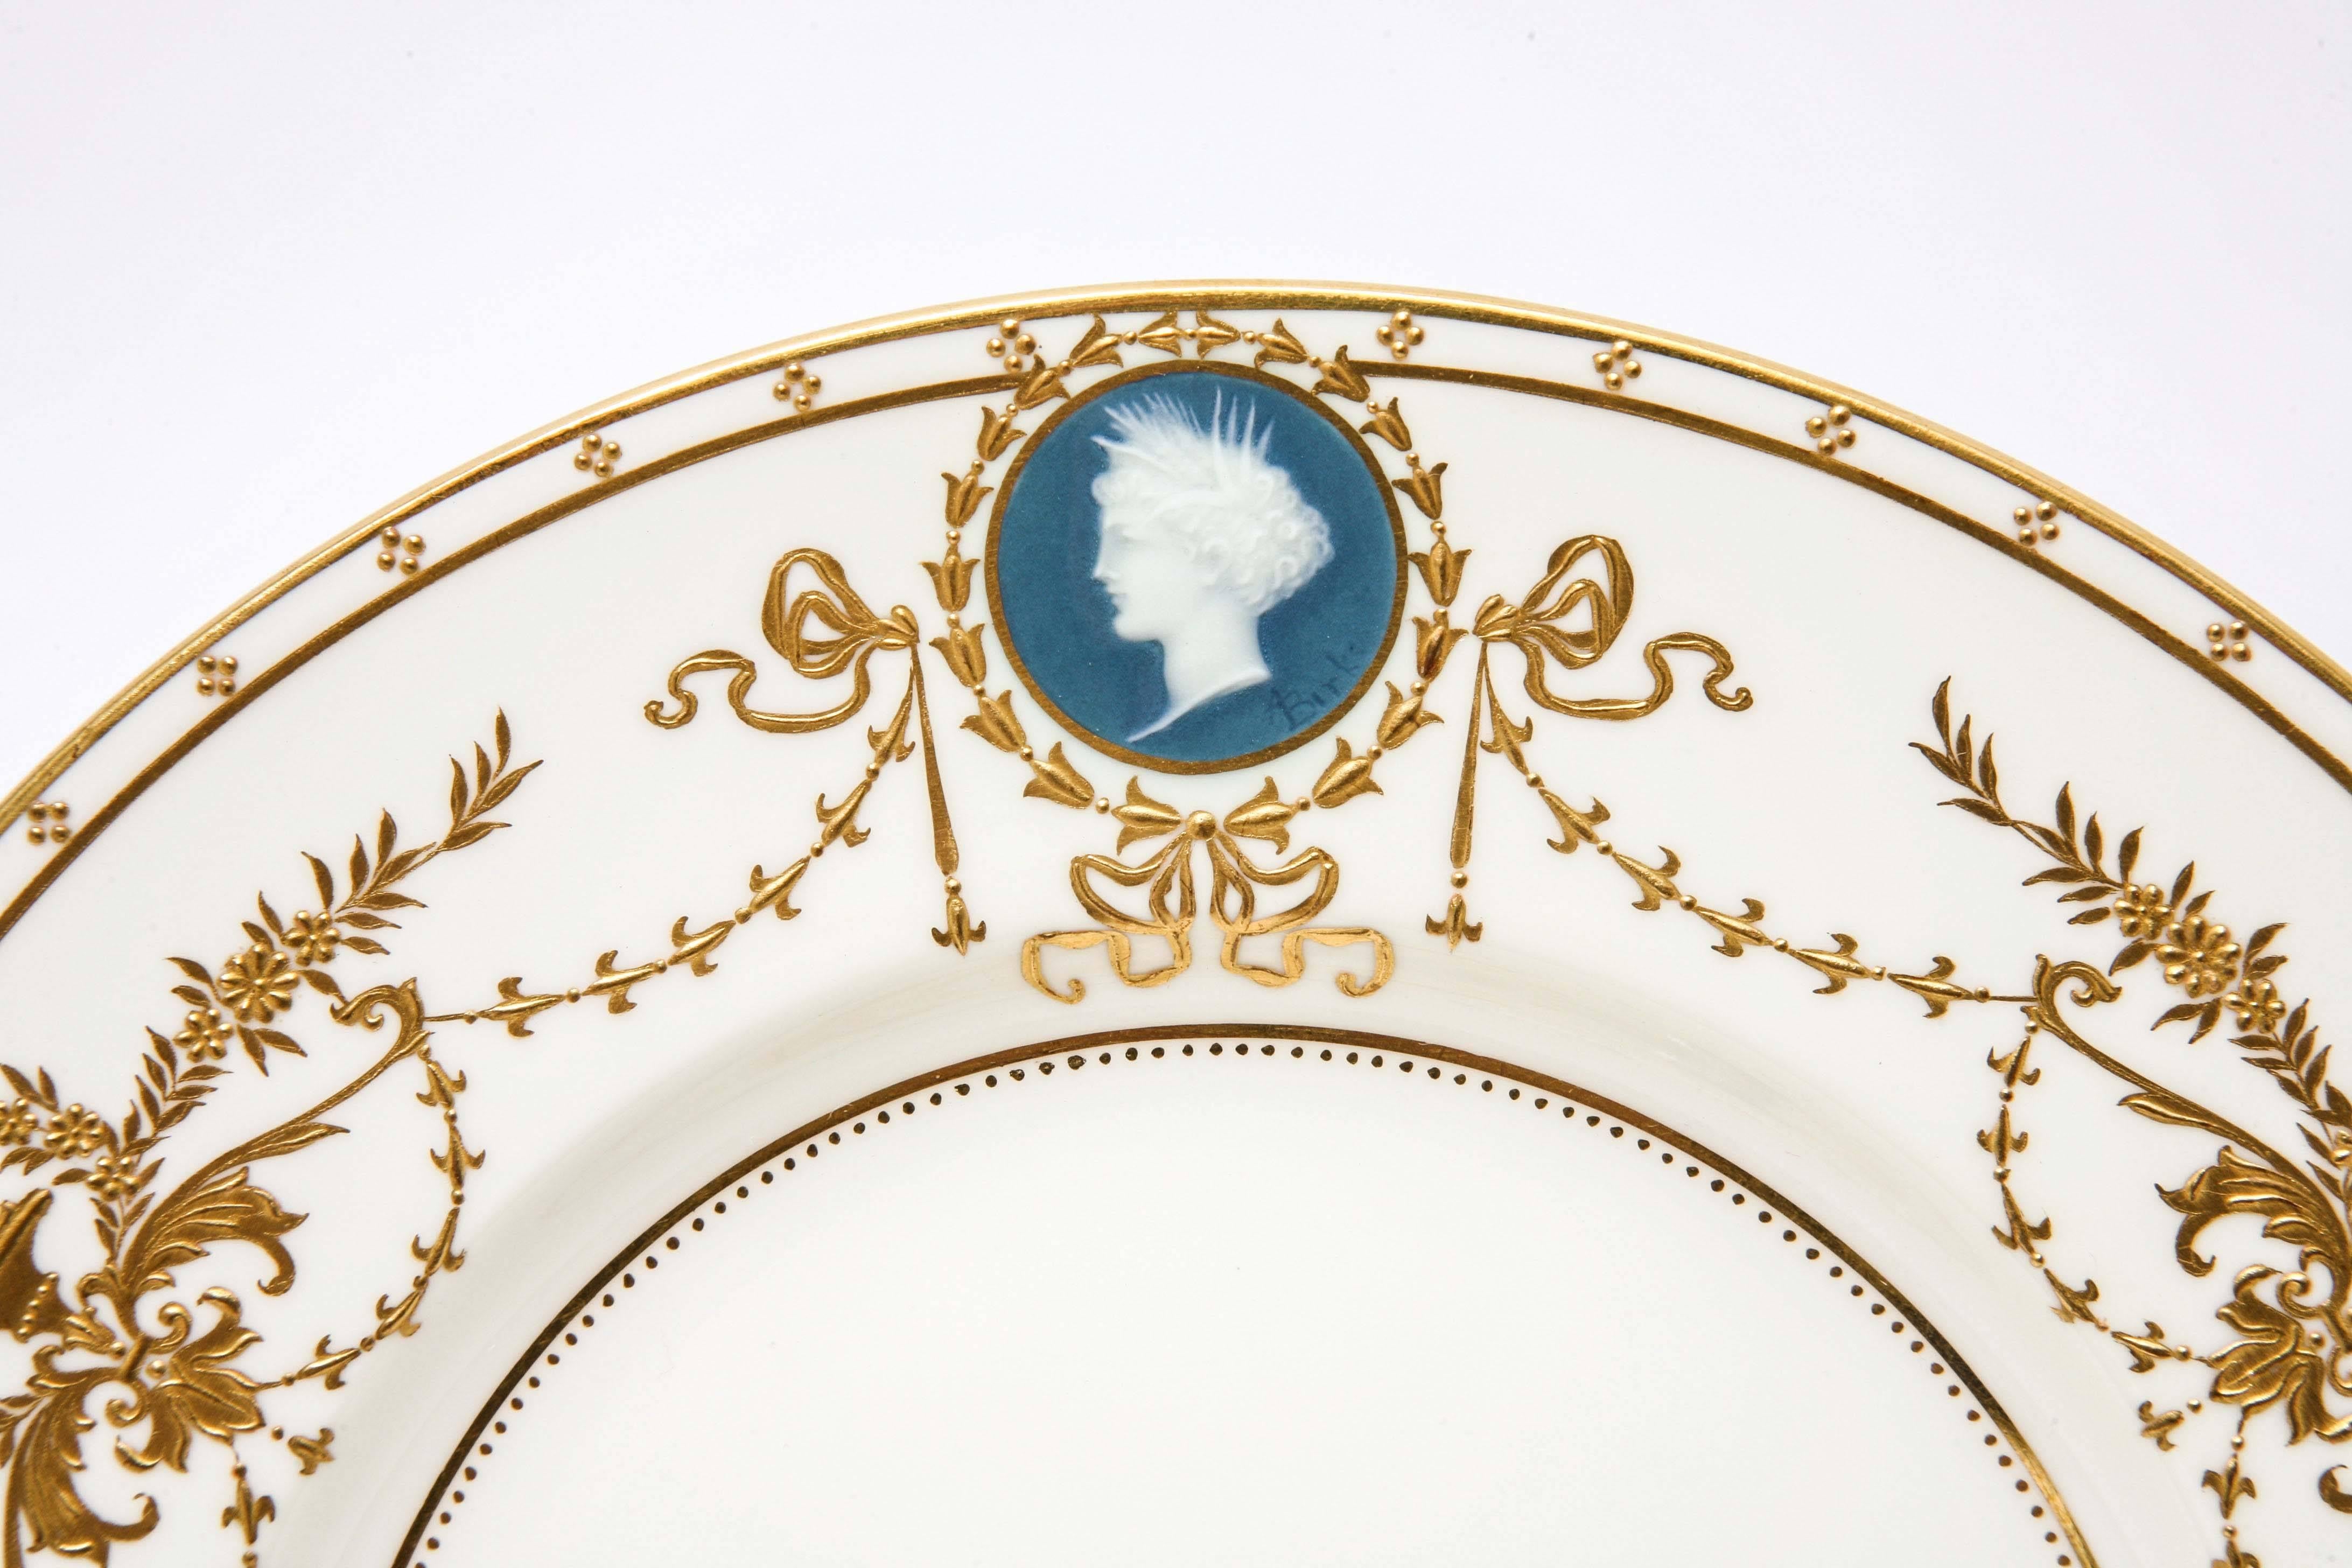 An elegant and wonderful find featuring the pinnacle of porcelain artistry. This complete set of 4 Minton, England for Tiffany’s Pâte-sur-pâte luncheon or dessert plates decorated by the legendary Alboin Birks dates to 1923 – the height of the